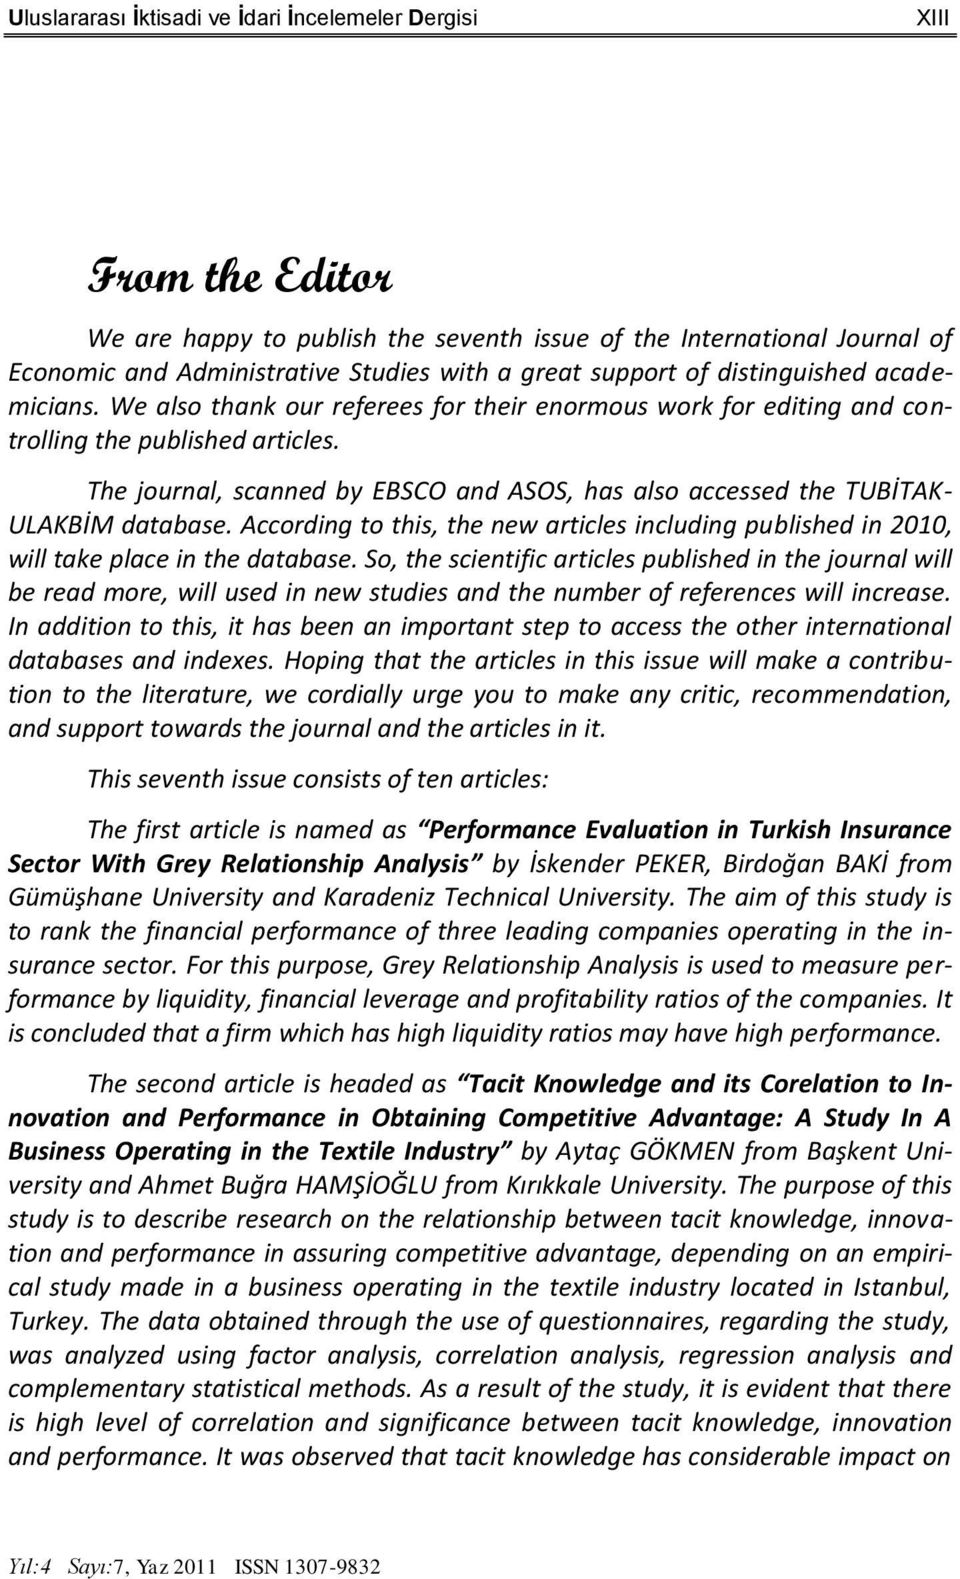 The journal, scanned by EBSCO and ASOS, has also accessed the TUBİTAK- ULAKBİM database. According to this, the new articles including published in 2010, will take place in the database.